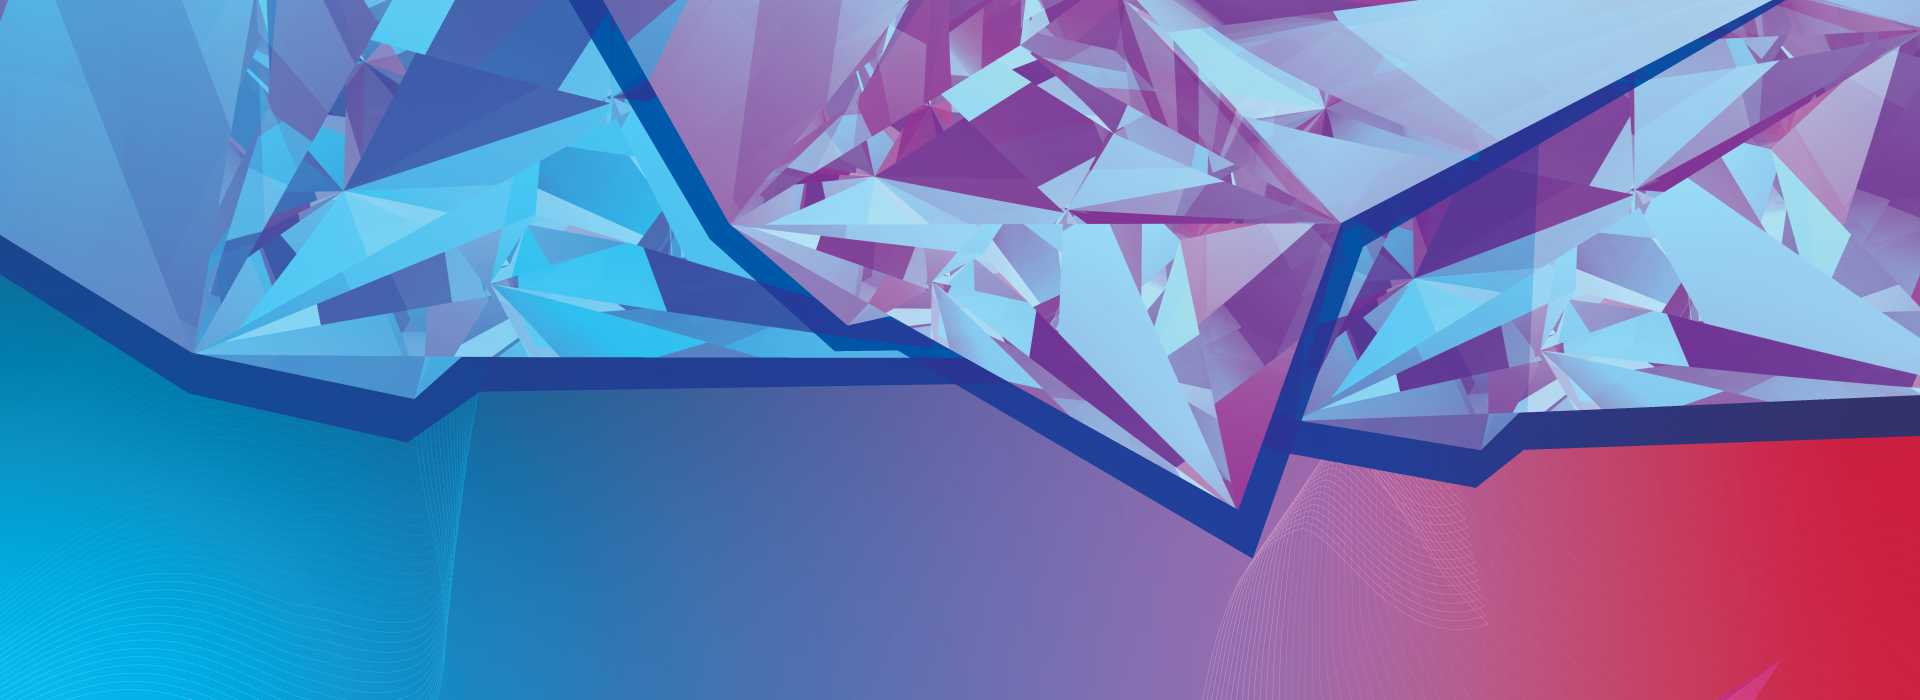 pink and blue abstract banner